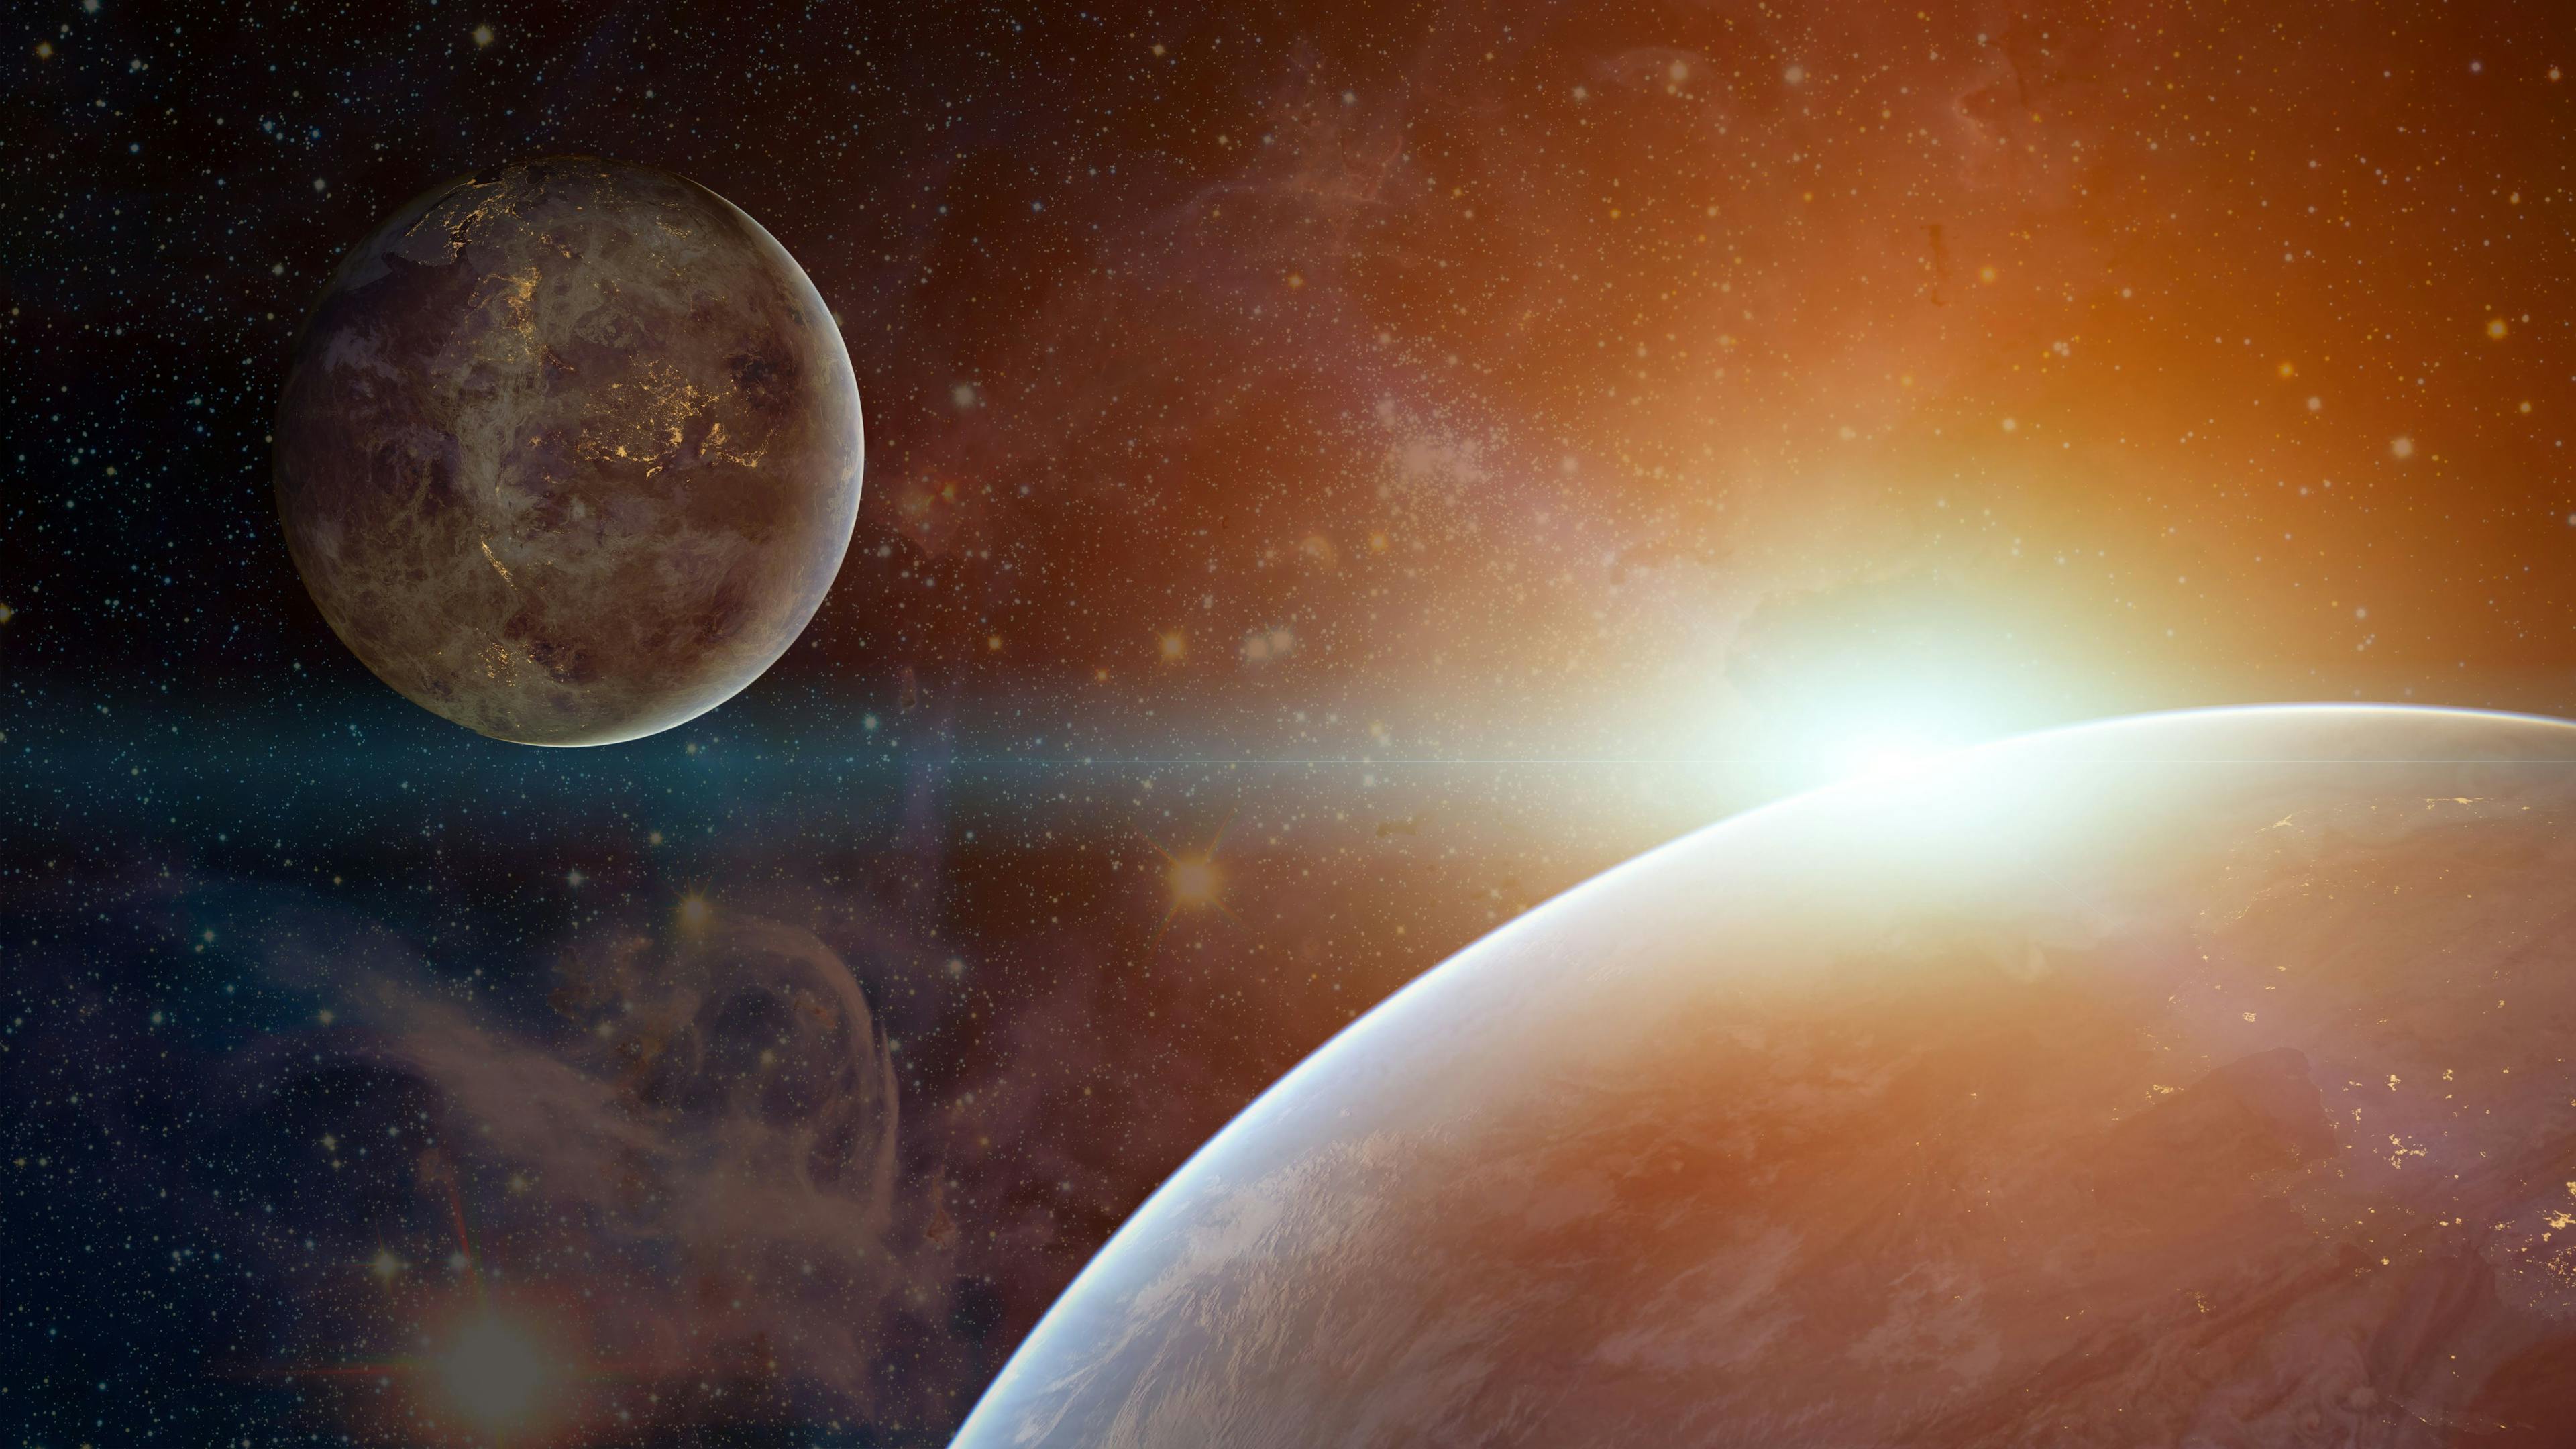 Planet system in space with exoplanet | Image Credit: © Supernova - stock.adobe.com